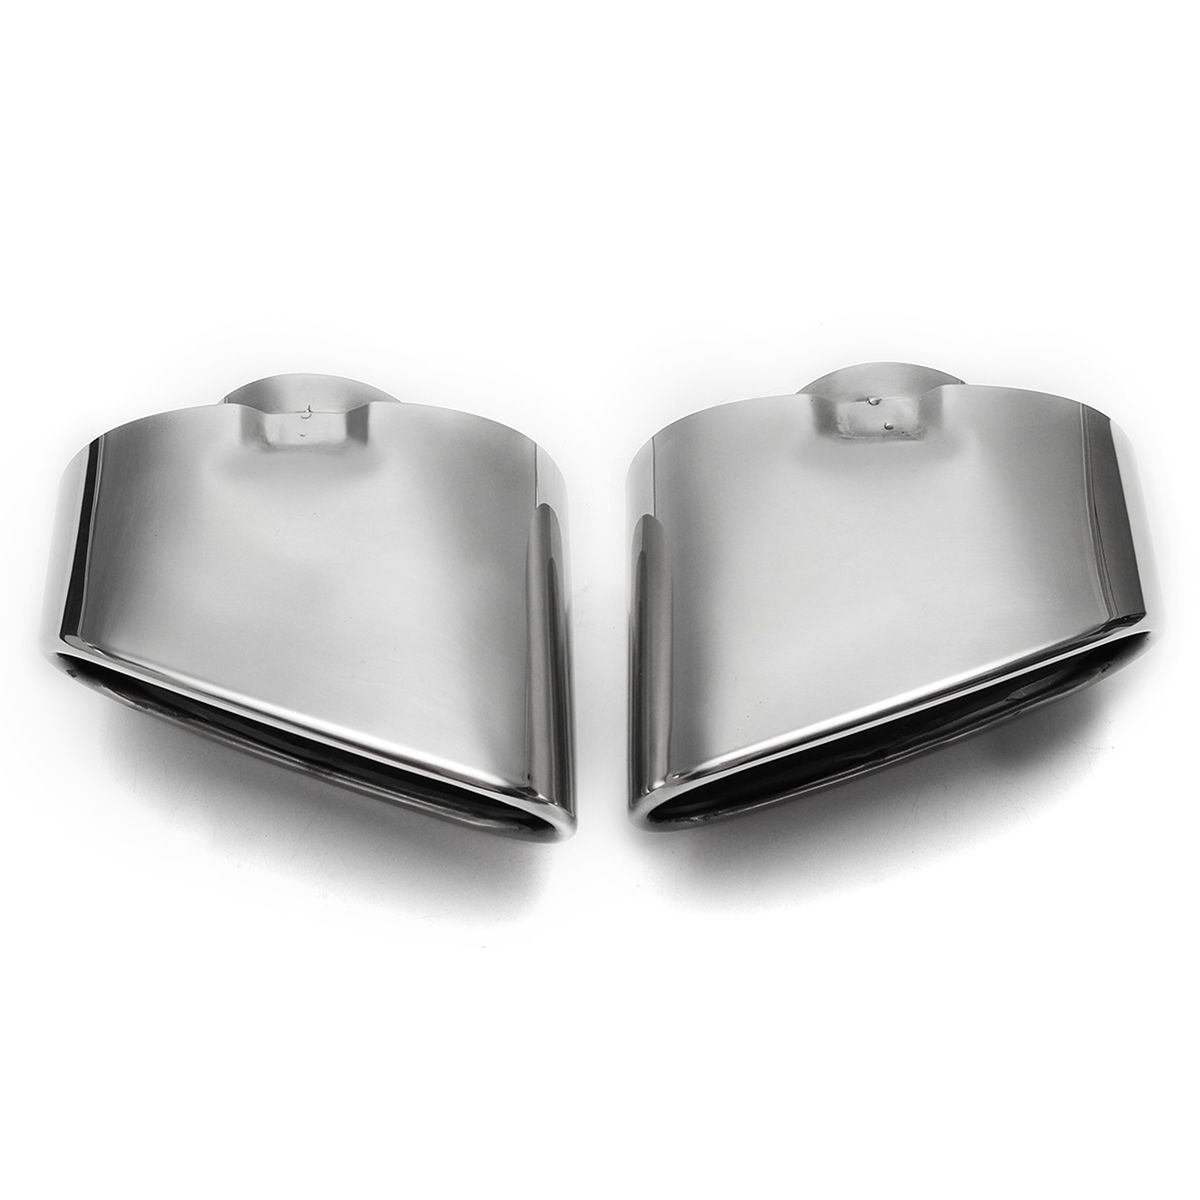 Pair-Chrome-Exhaust-Dual-Tailpipe-Muffler-Tip-Stainless-Steel-For-Bmw-1168595